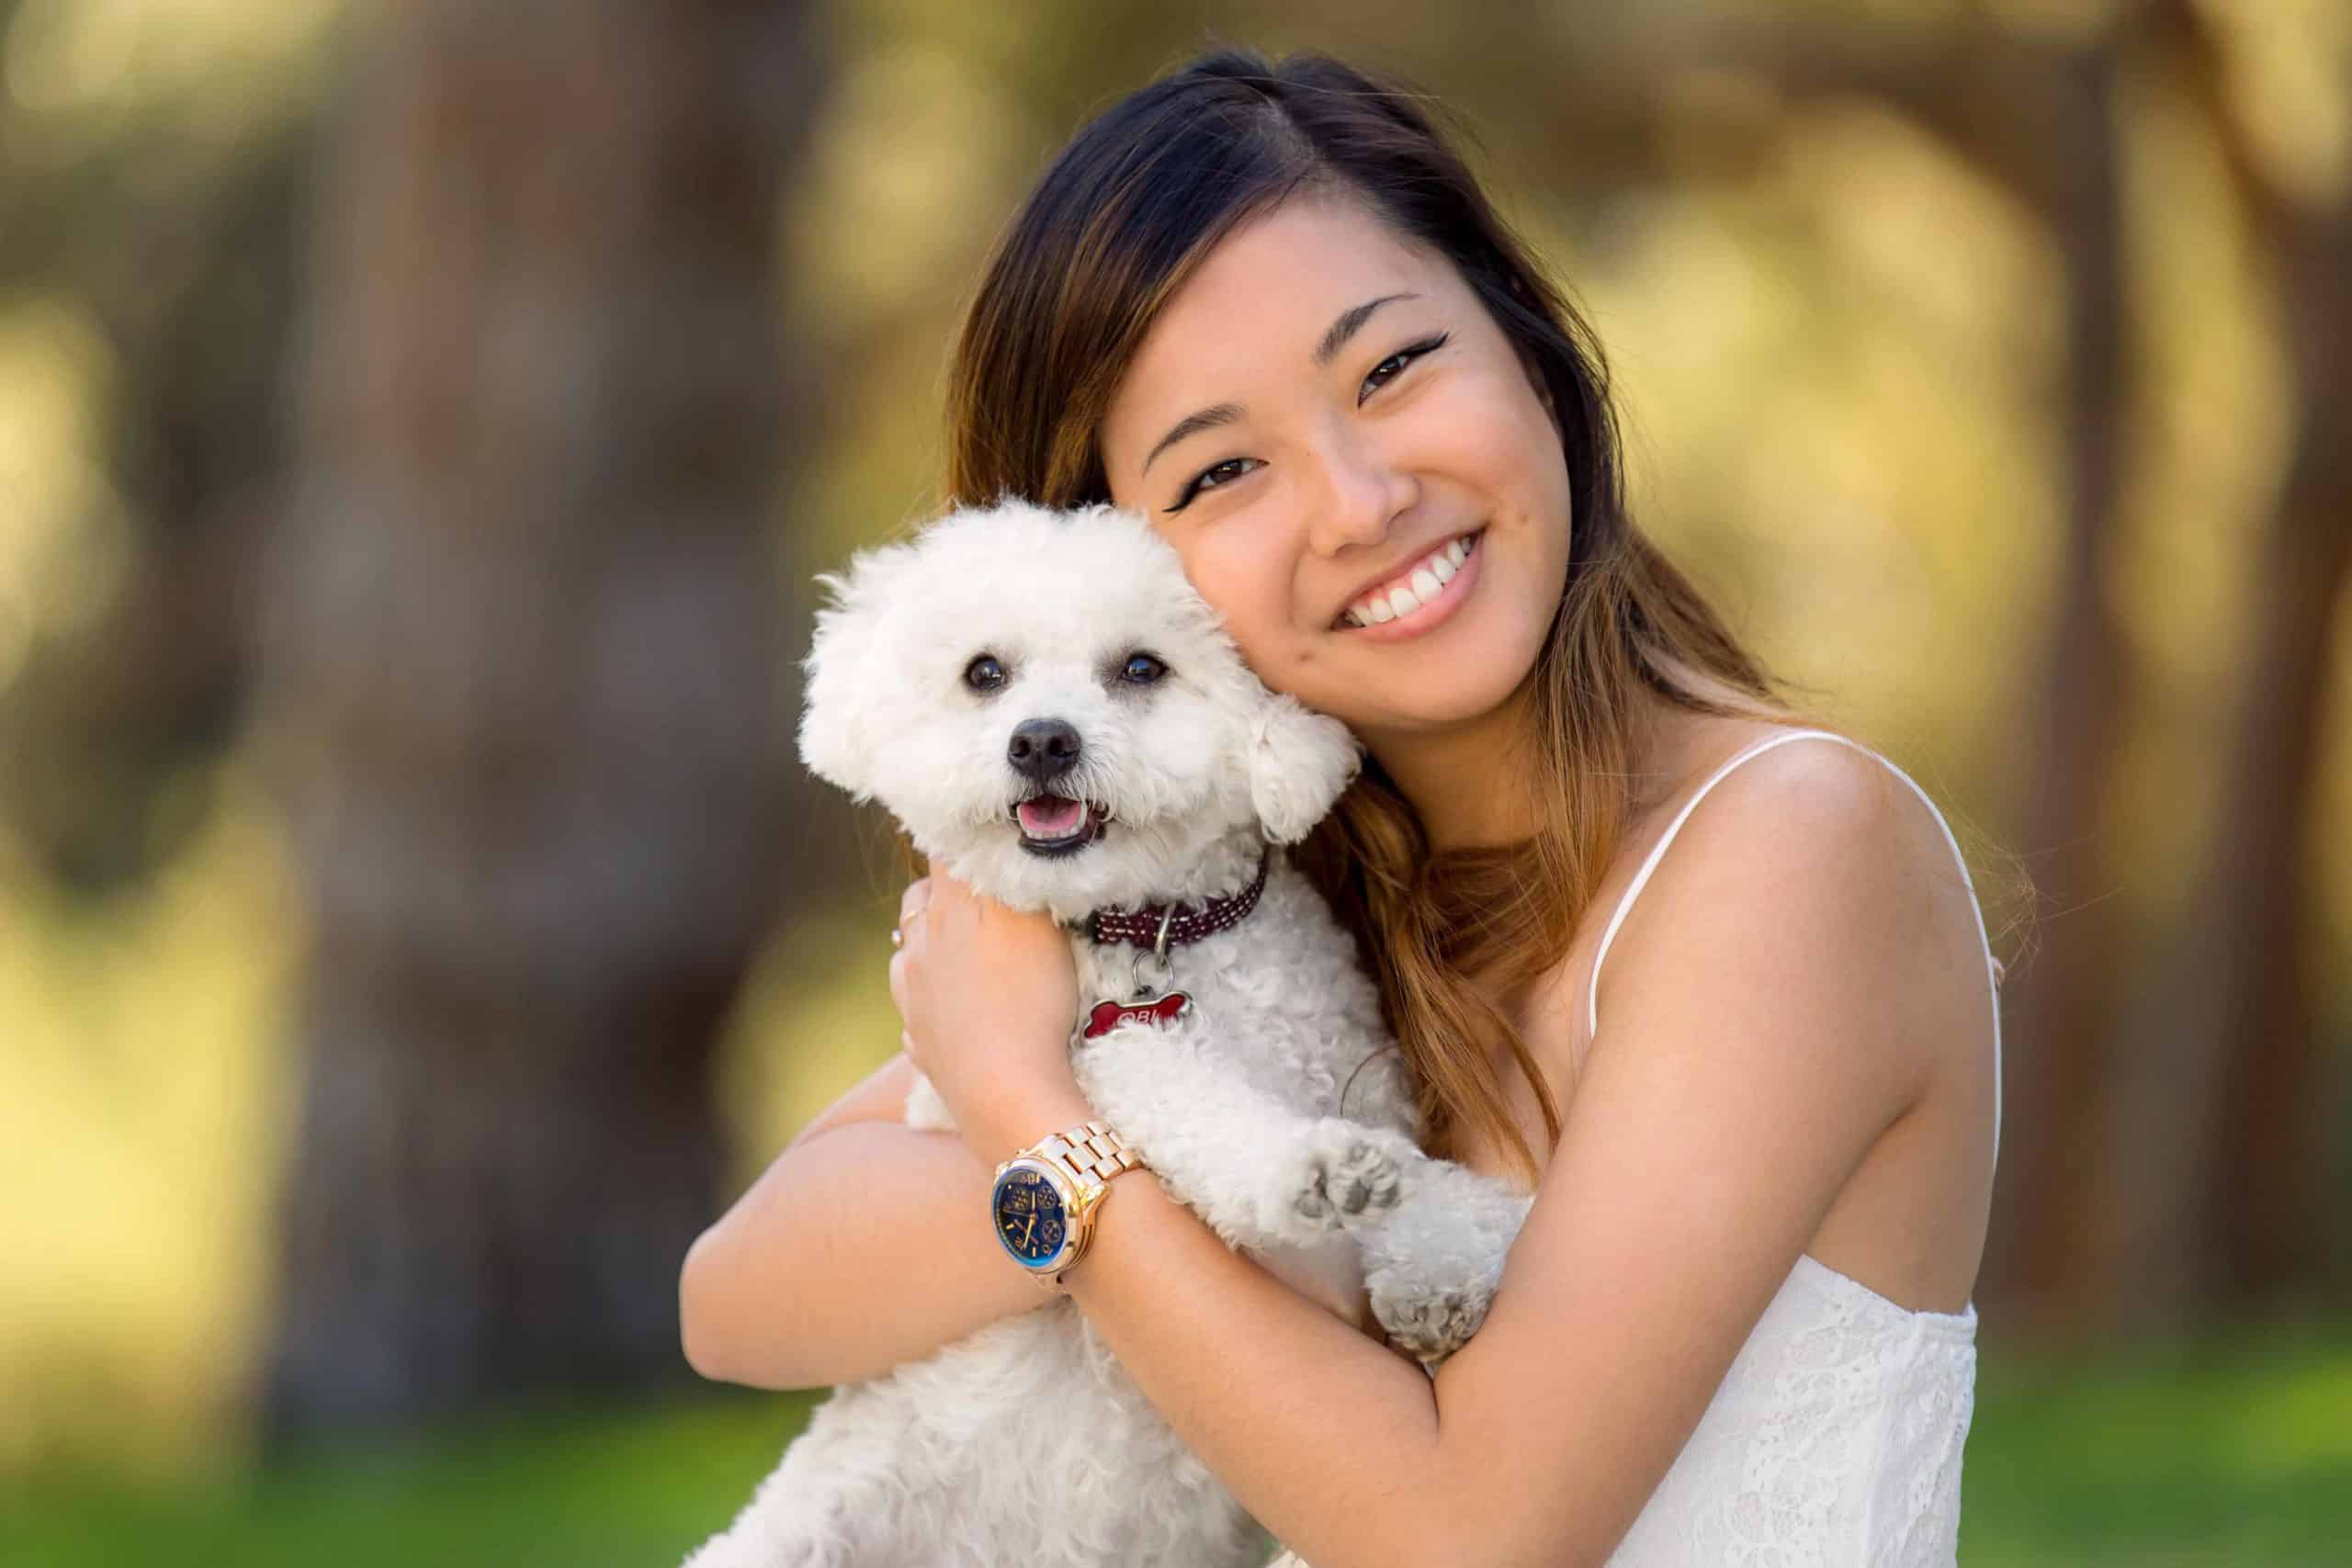 Woman hugs Bolognese puppy. Show your dog affection by using a gentle touch, providing favorite treats, and creating a safe space for your dog.